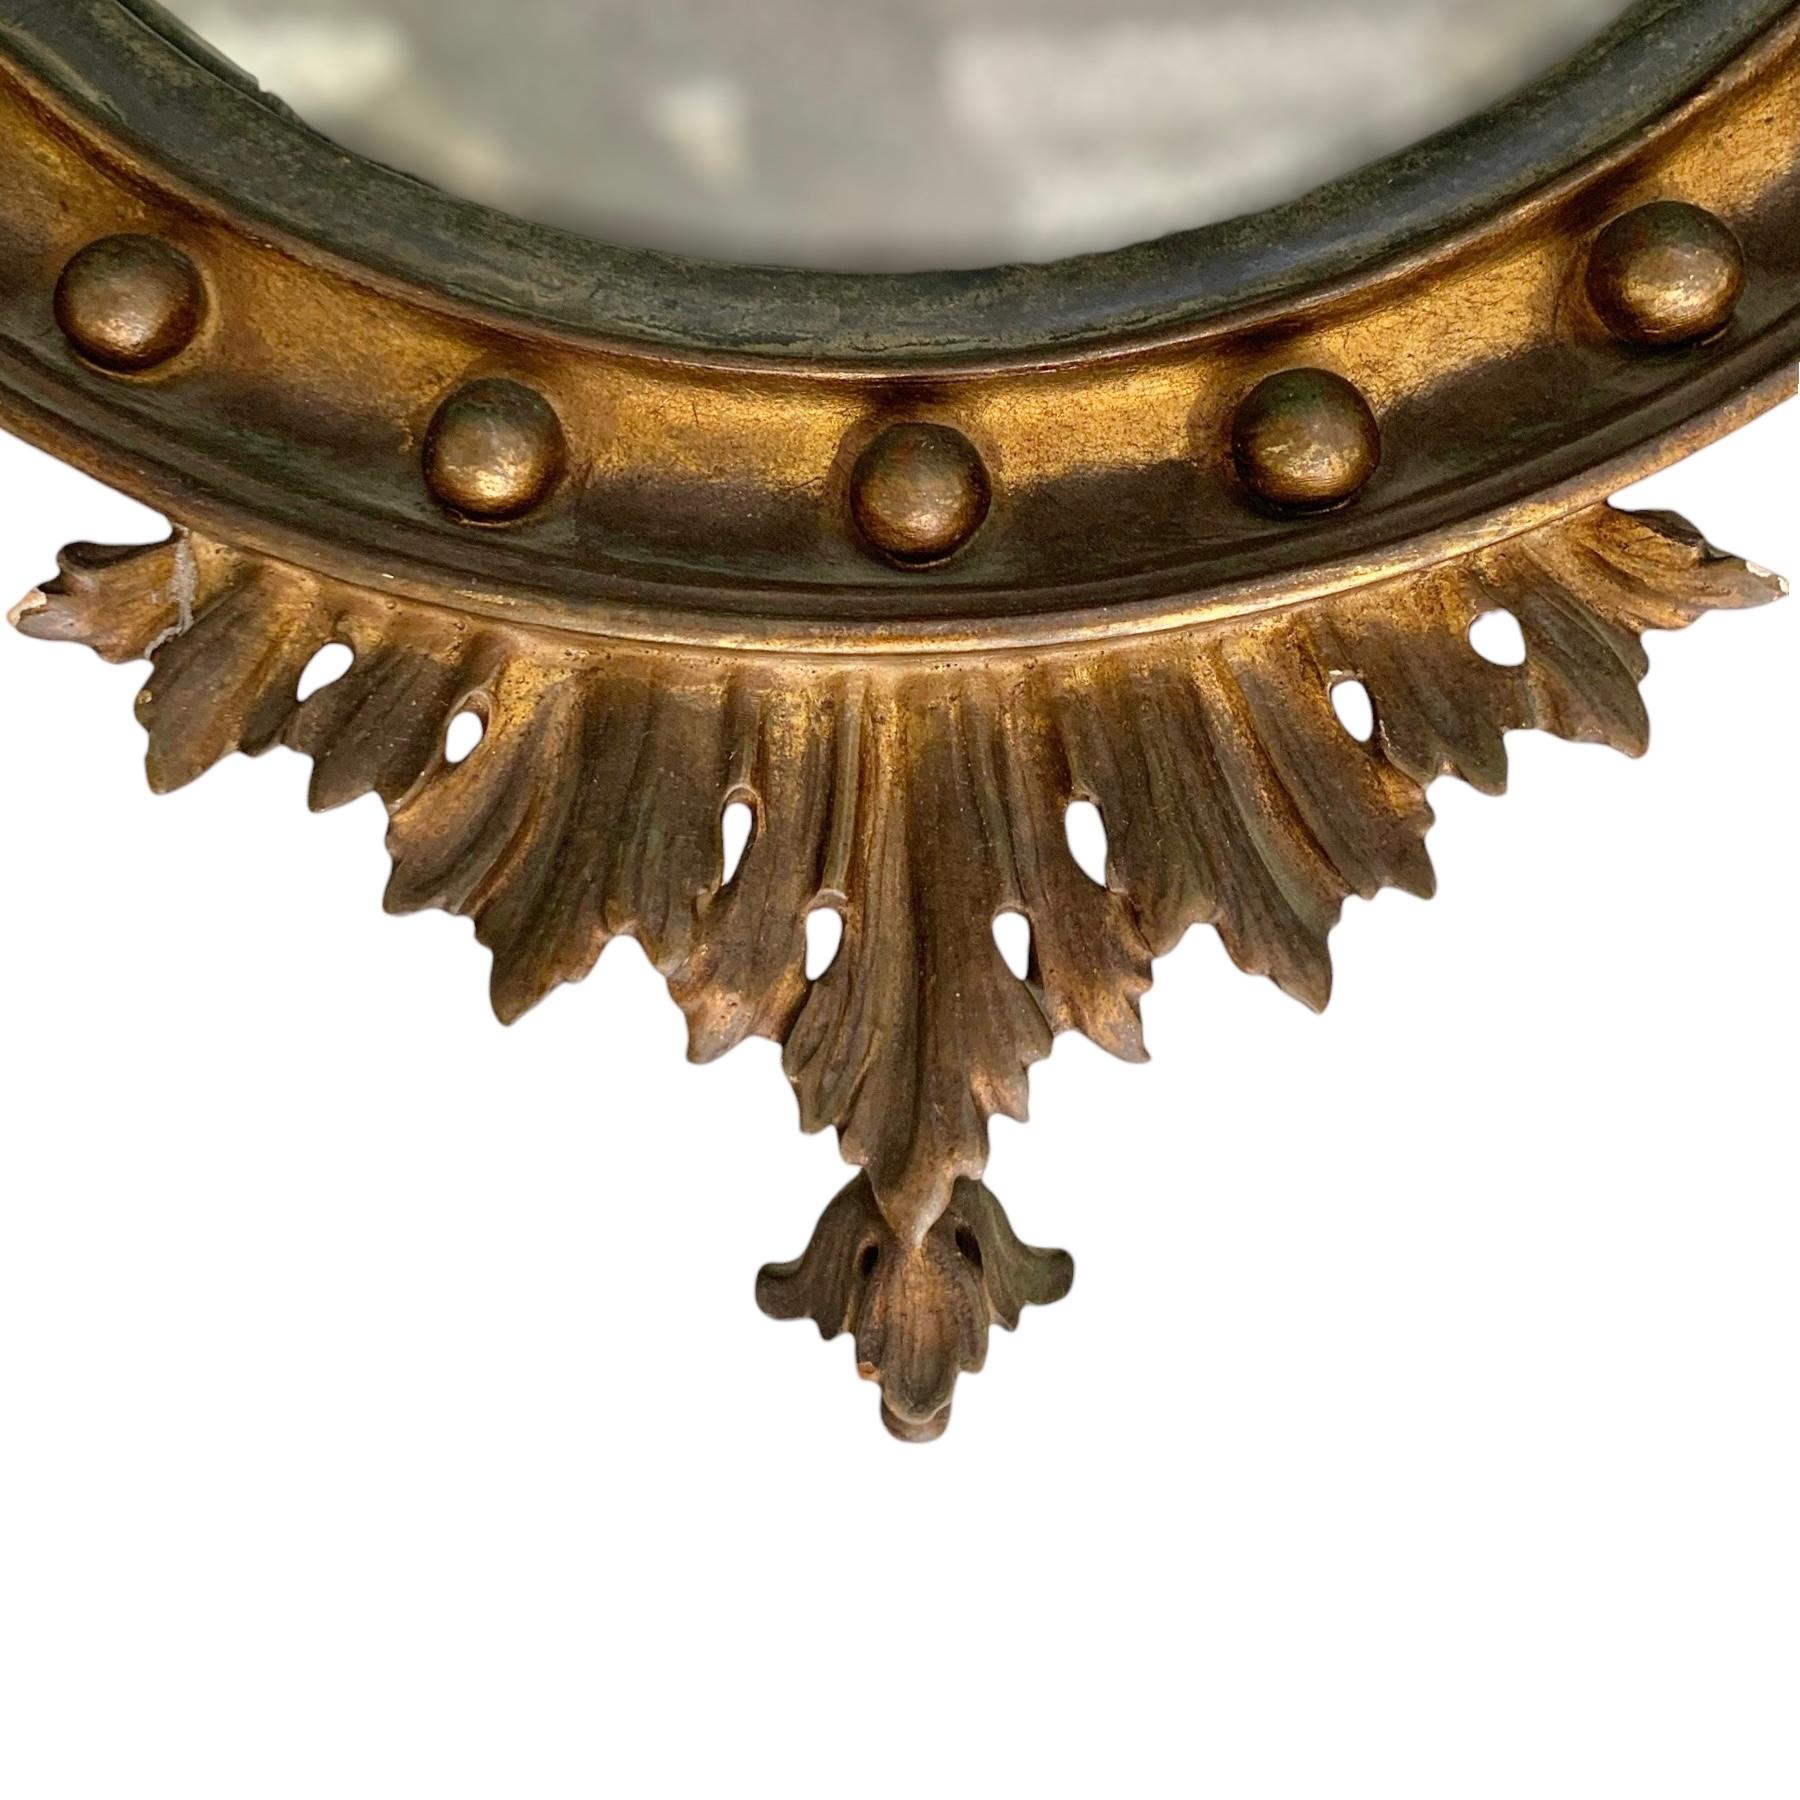 Antique Original French Neoclassical Round Gilt Wood Mirror In Good Condition For Sale In Rostock, MV